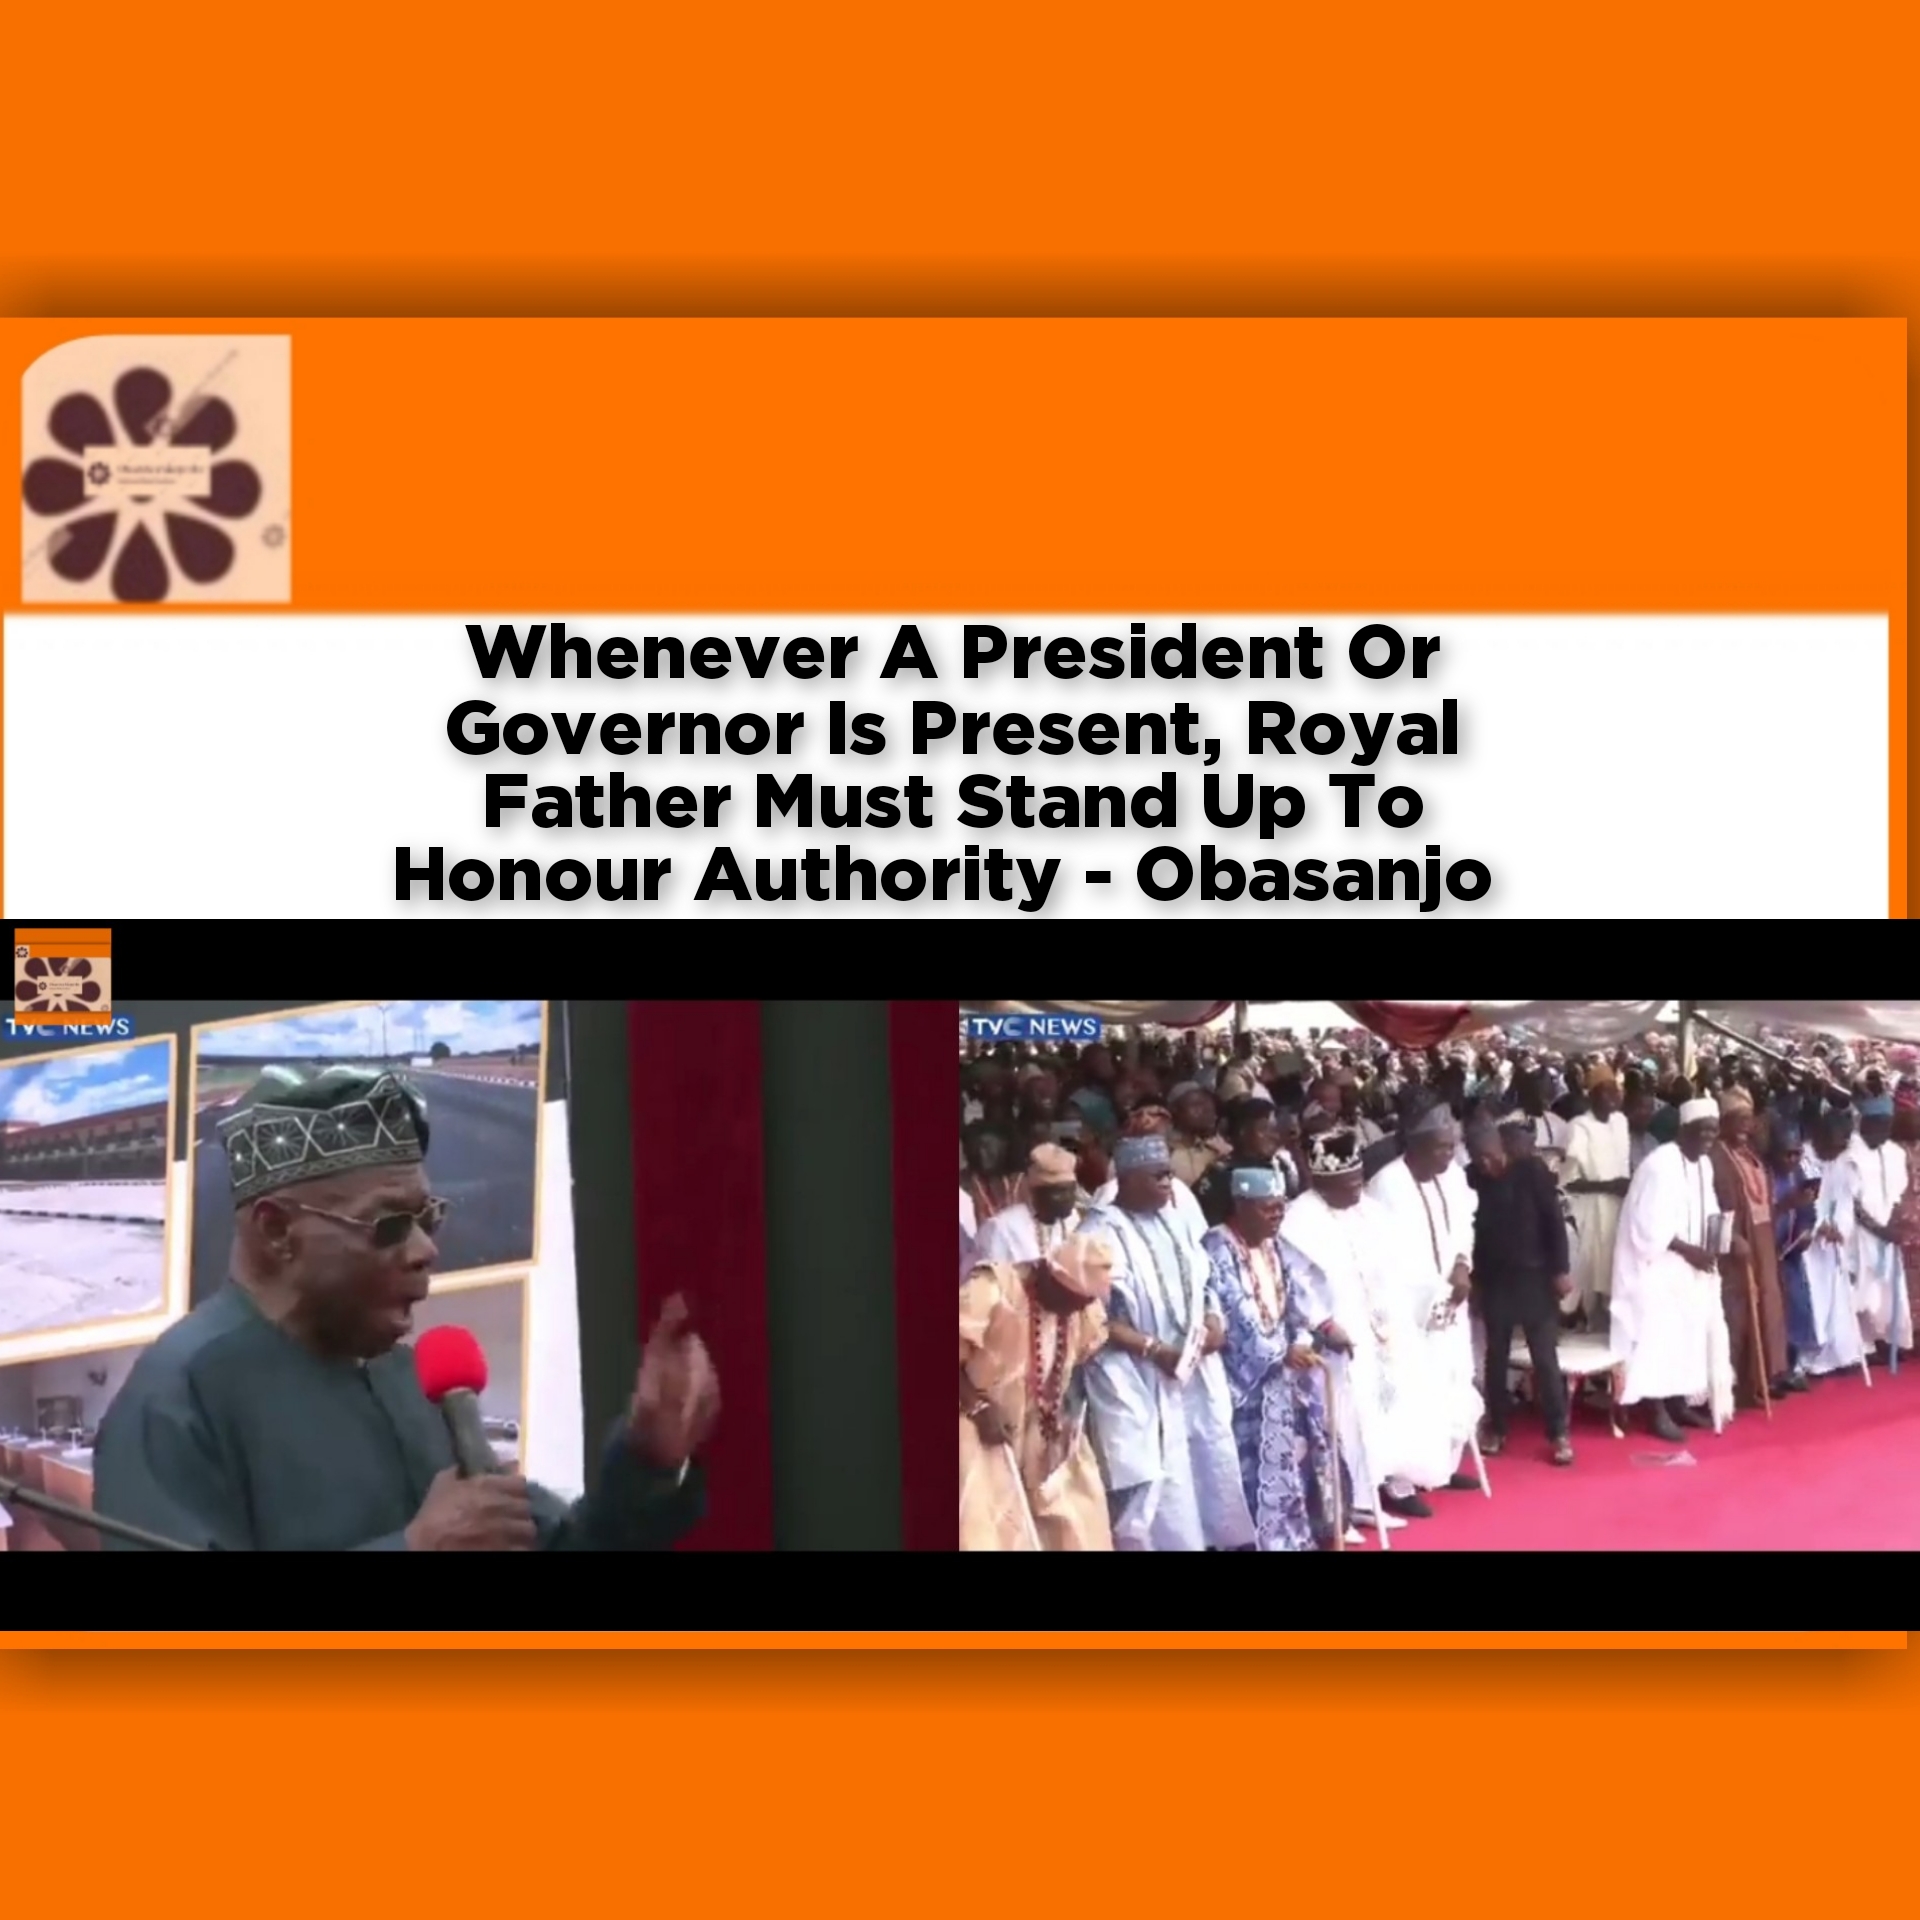 Whenever A President Or Governor Is Present, Royal Father Must Stand Up To Honour Authority - Obasanjo ~ OsazuwaAkonedo #Ondo